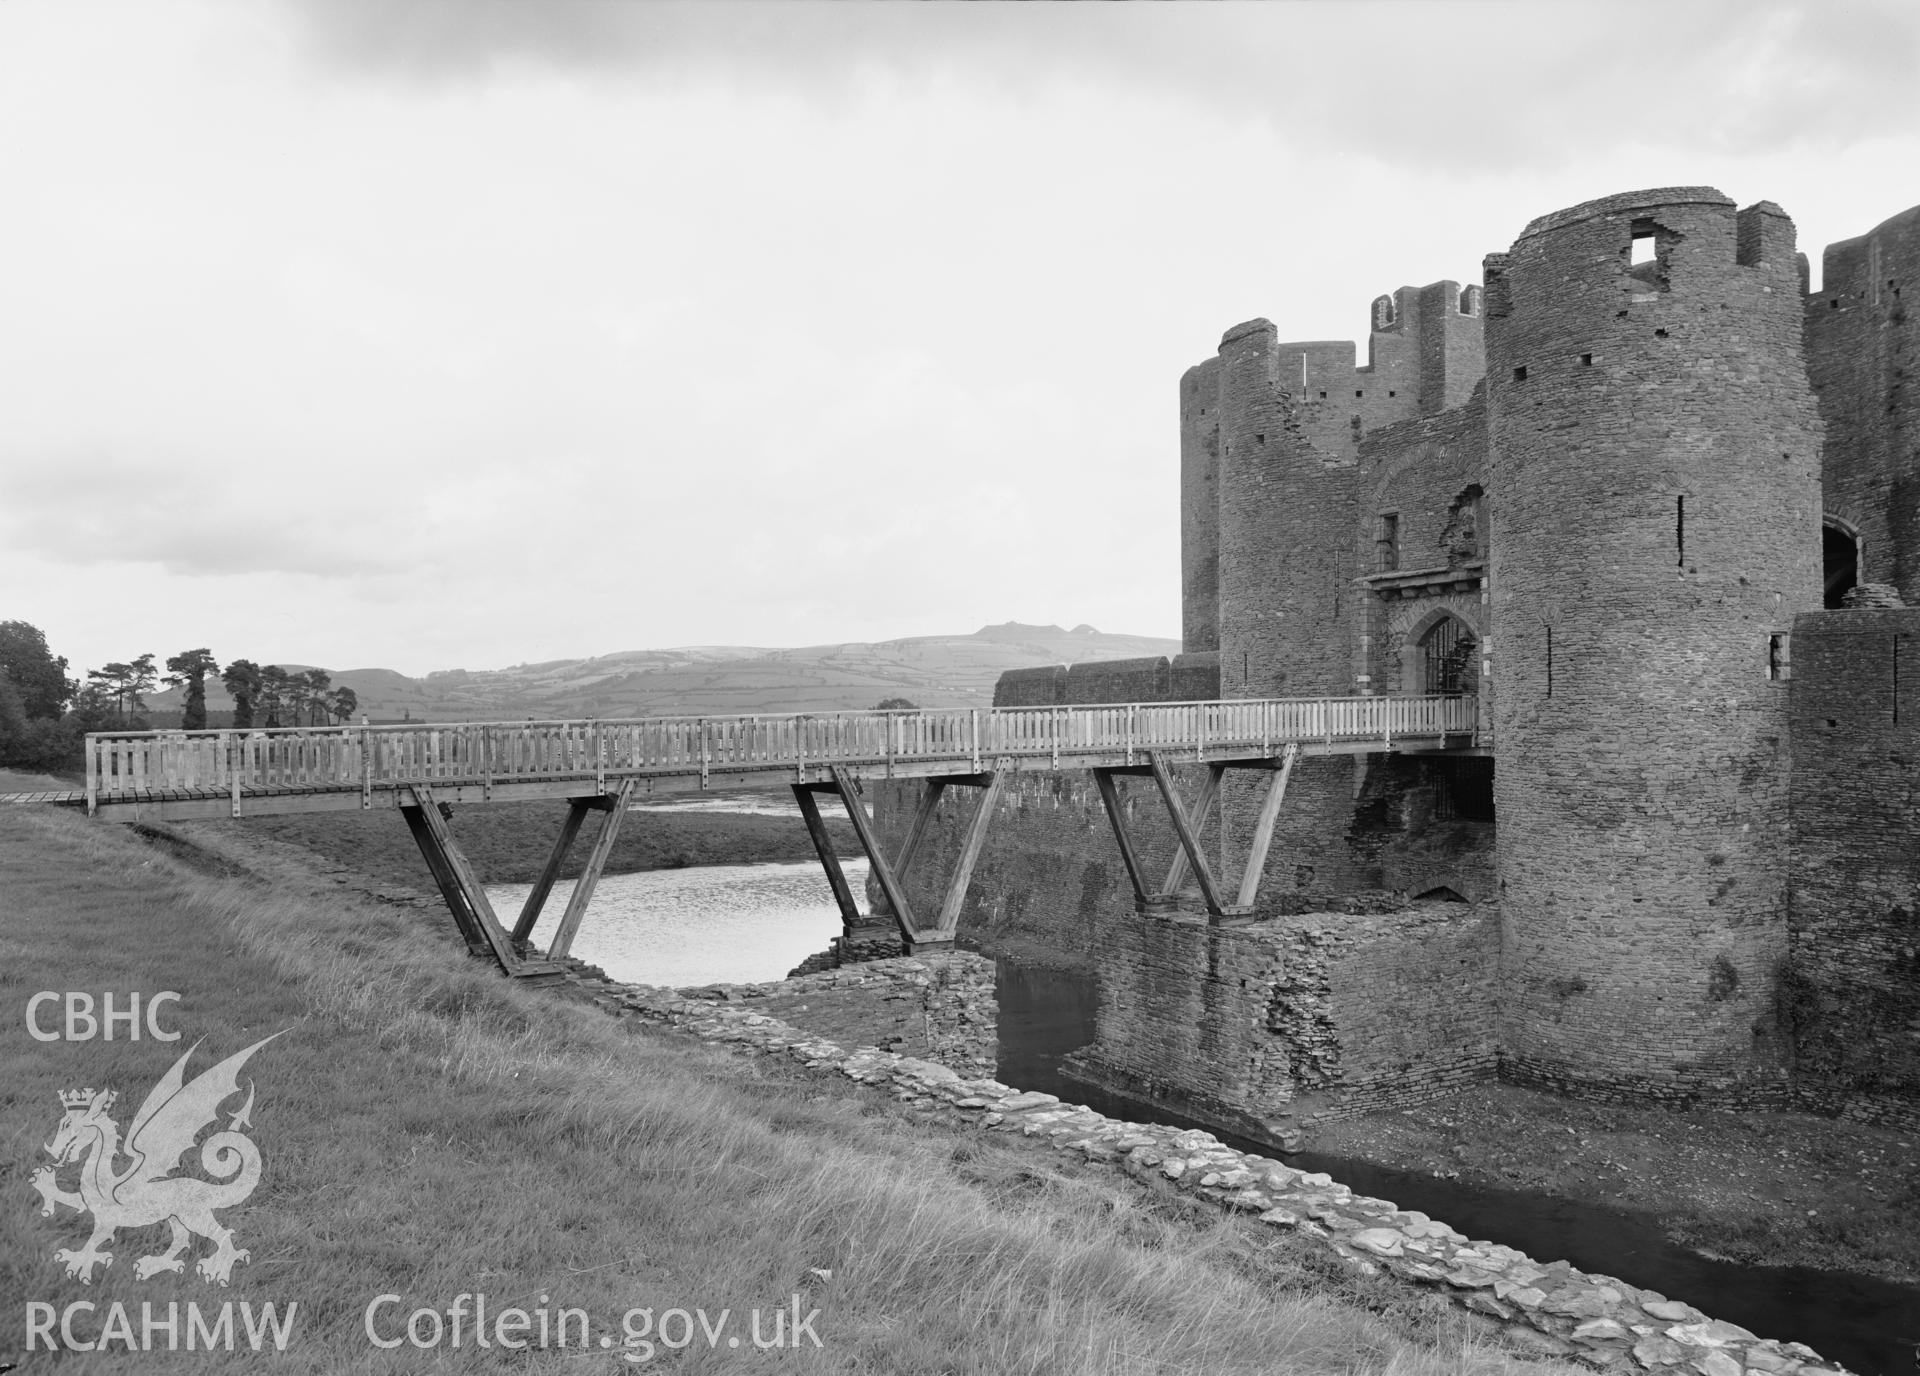 D.O.E photograph of Caerphilly Castle - west gate and bridge from the south.